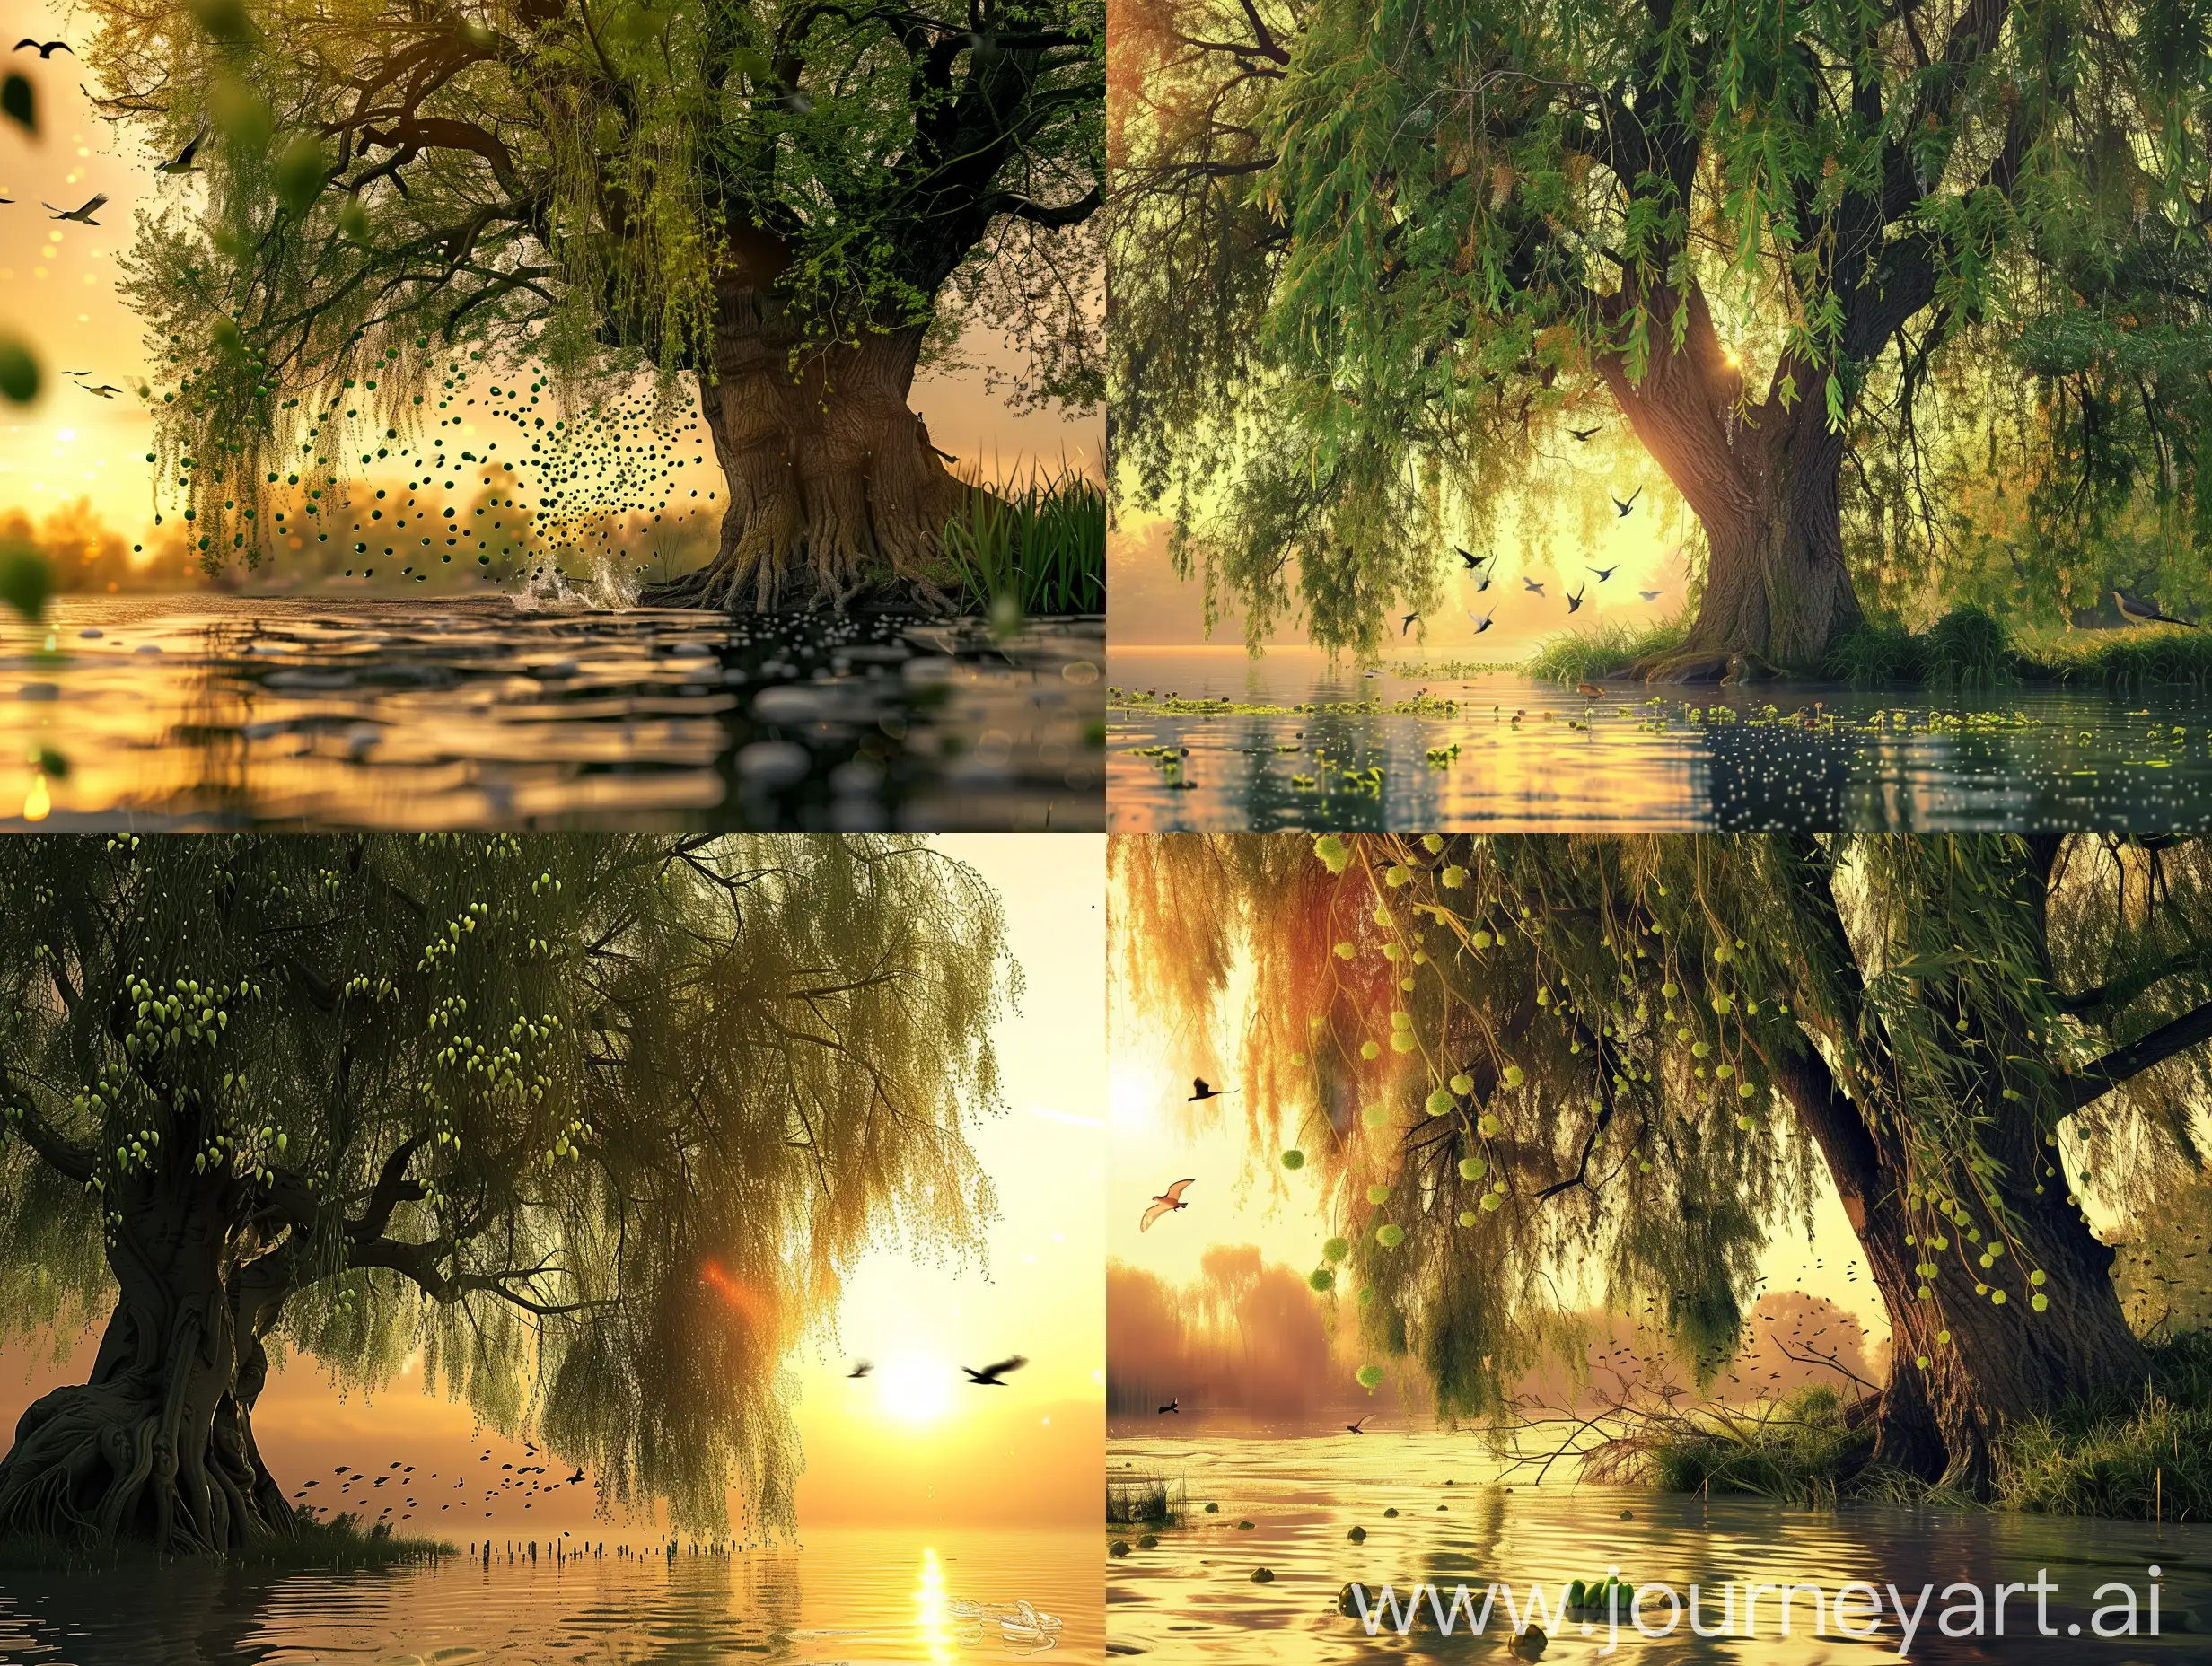 Sunset, evening, a very big willow tree grows on the river bank, the tree is full of green buds, the willow tree hangs down into the water, a few birds fly around and small fish jump up in the water, macro, natural light, warm tones, frontal view, background bokeh/bokeh, macro camera, close up